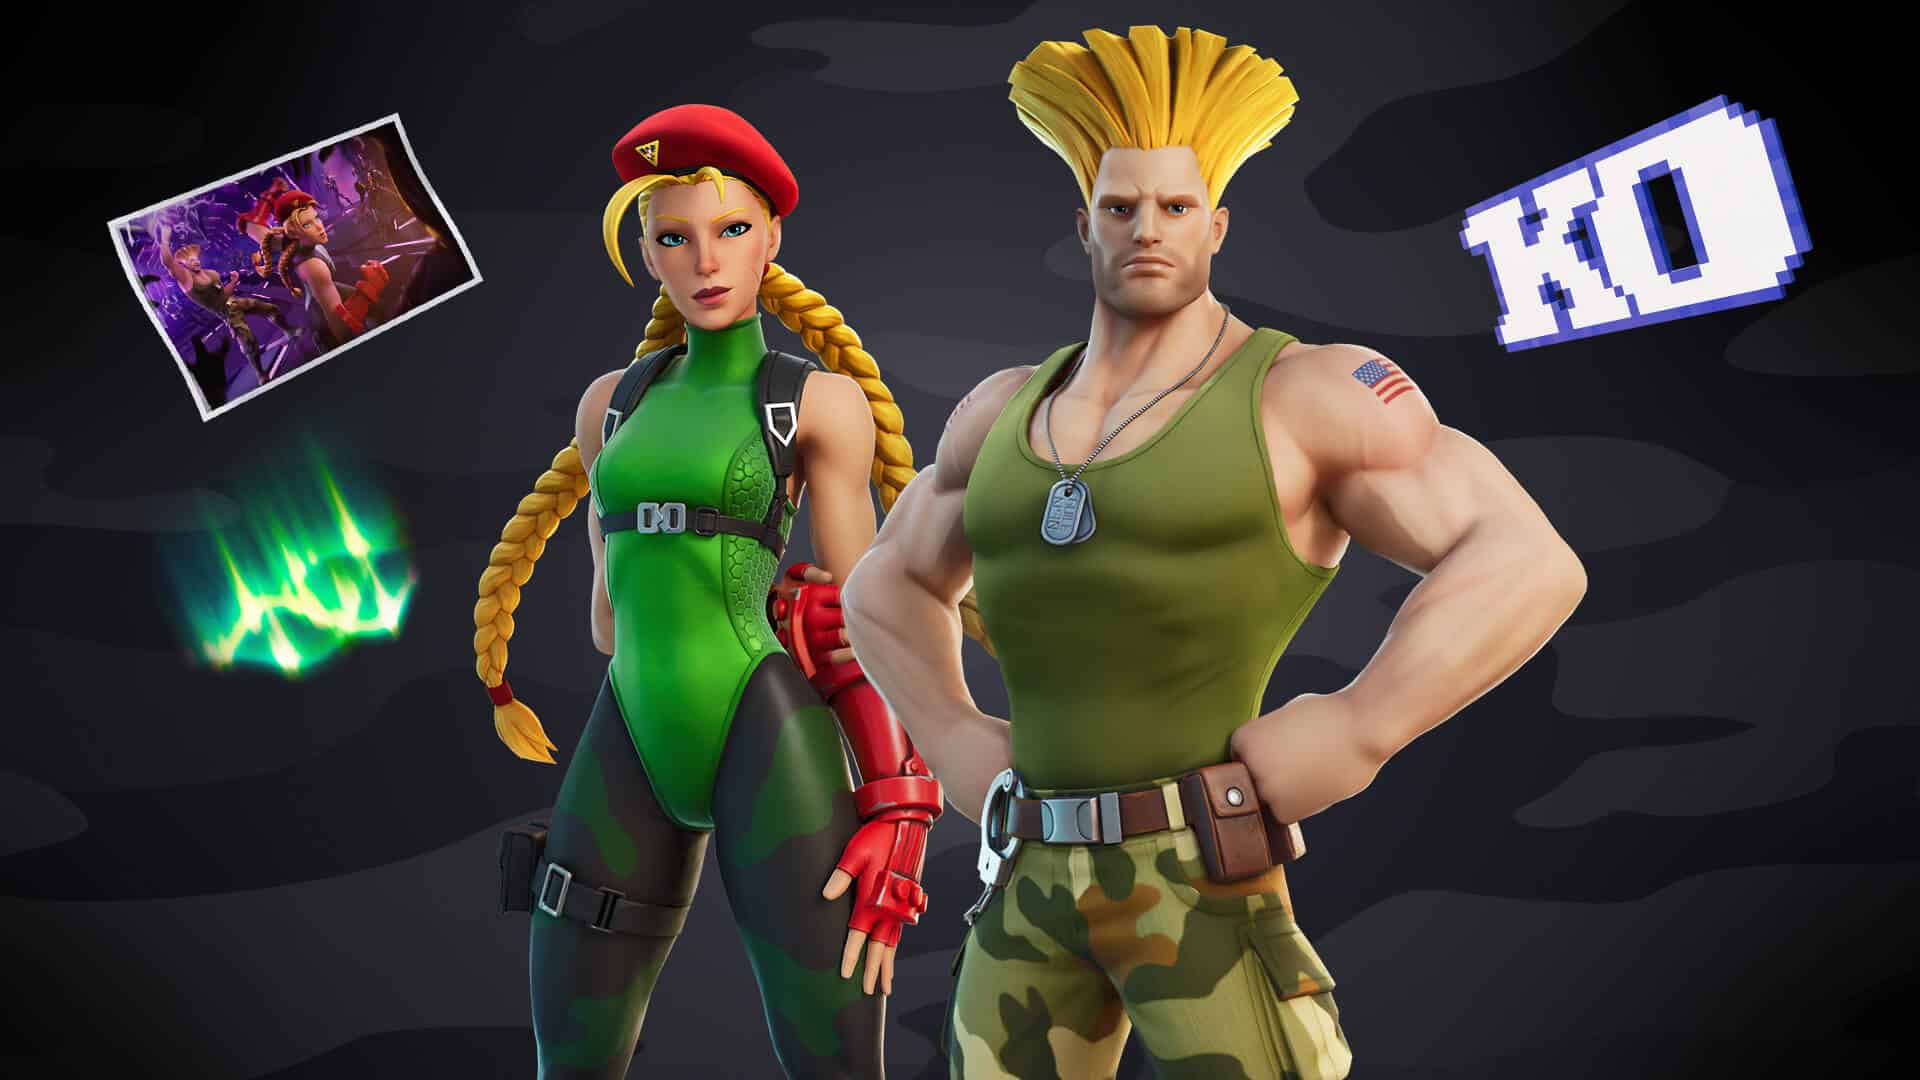 Fortnite Cammy and Guile item shop release date, Cammy Cup launch